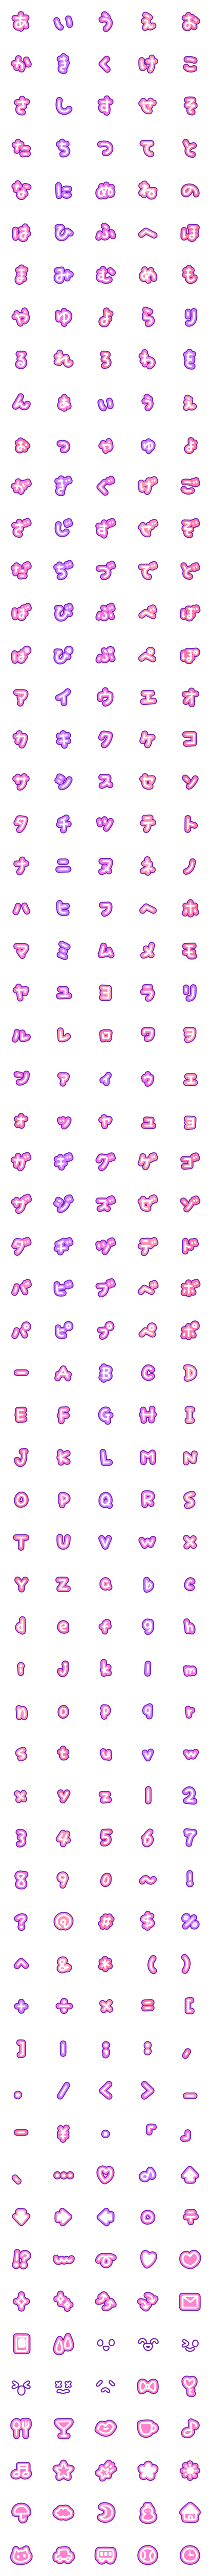 Line絵文字 ピンク 紫のかわいいデコ文字 絵文字 305種類 120円